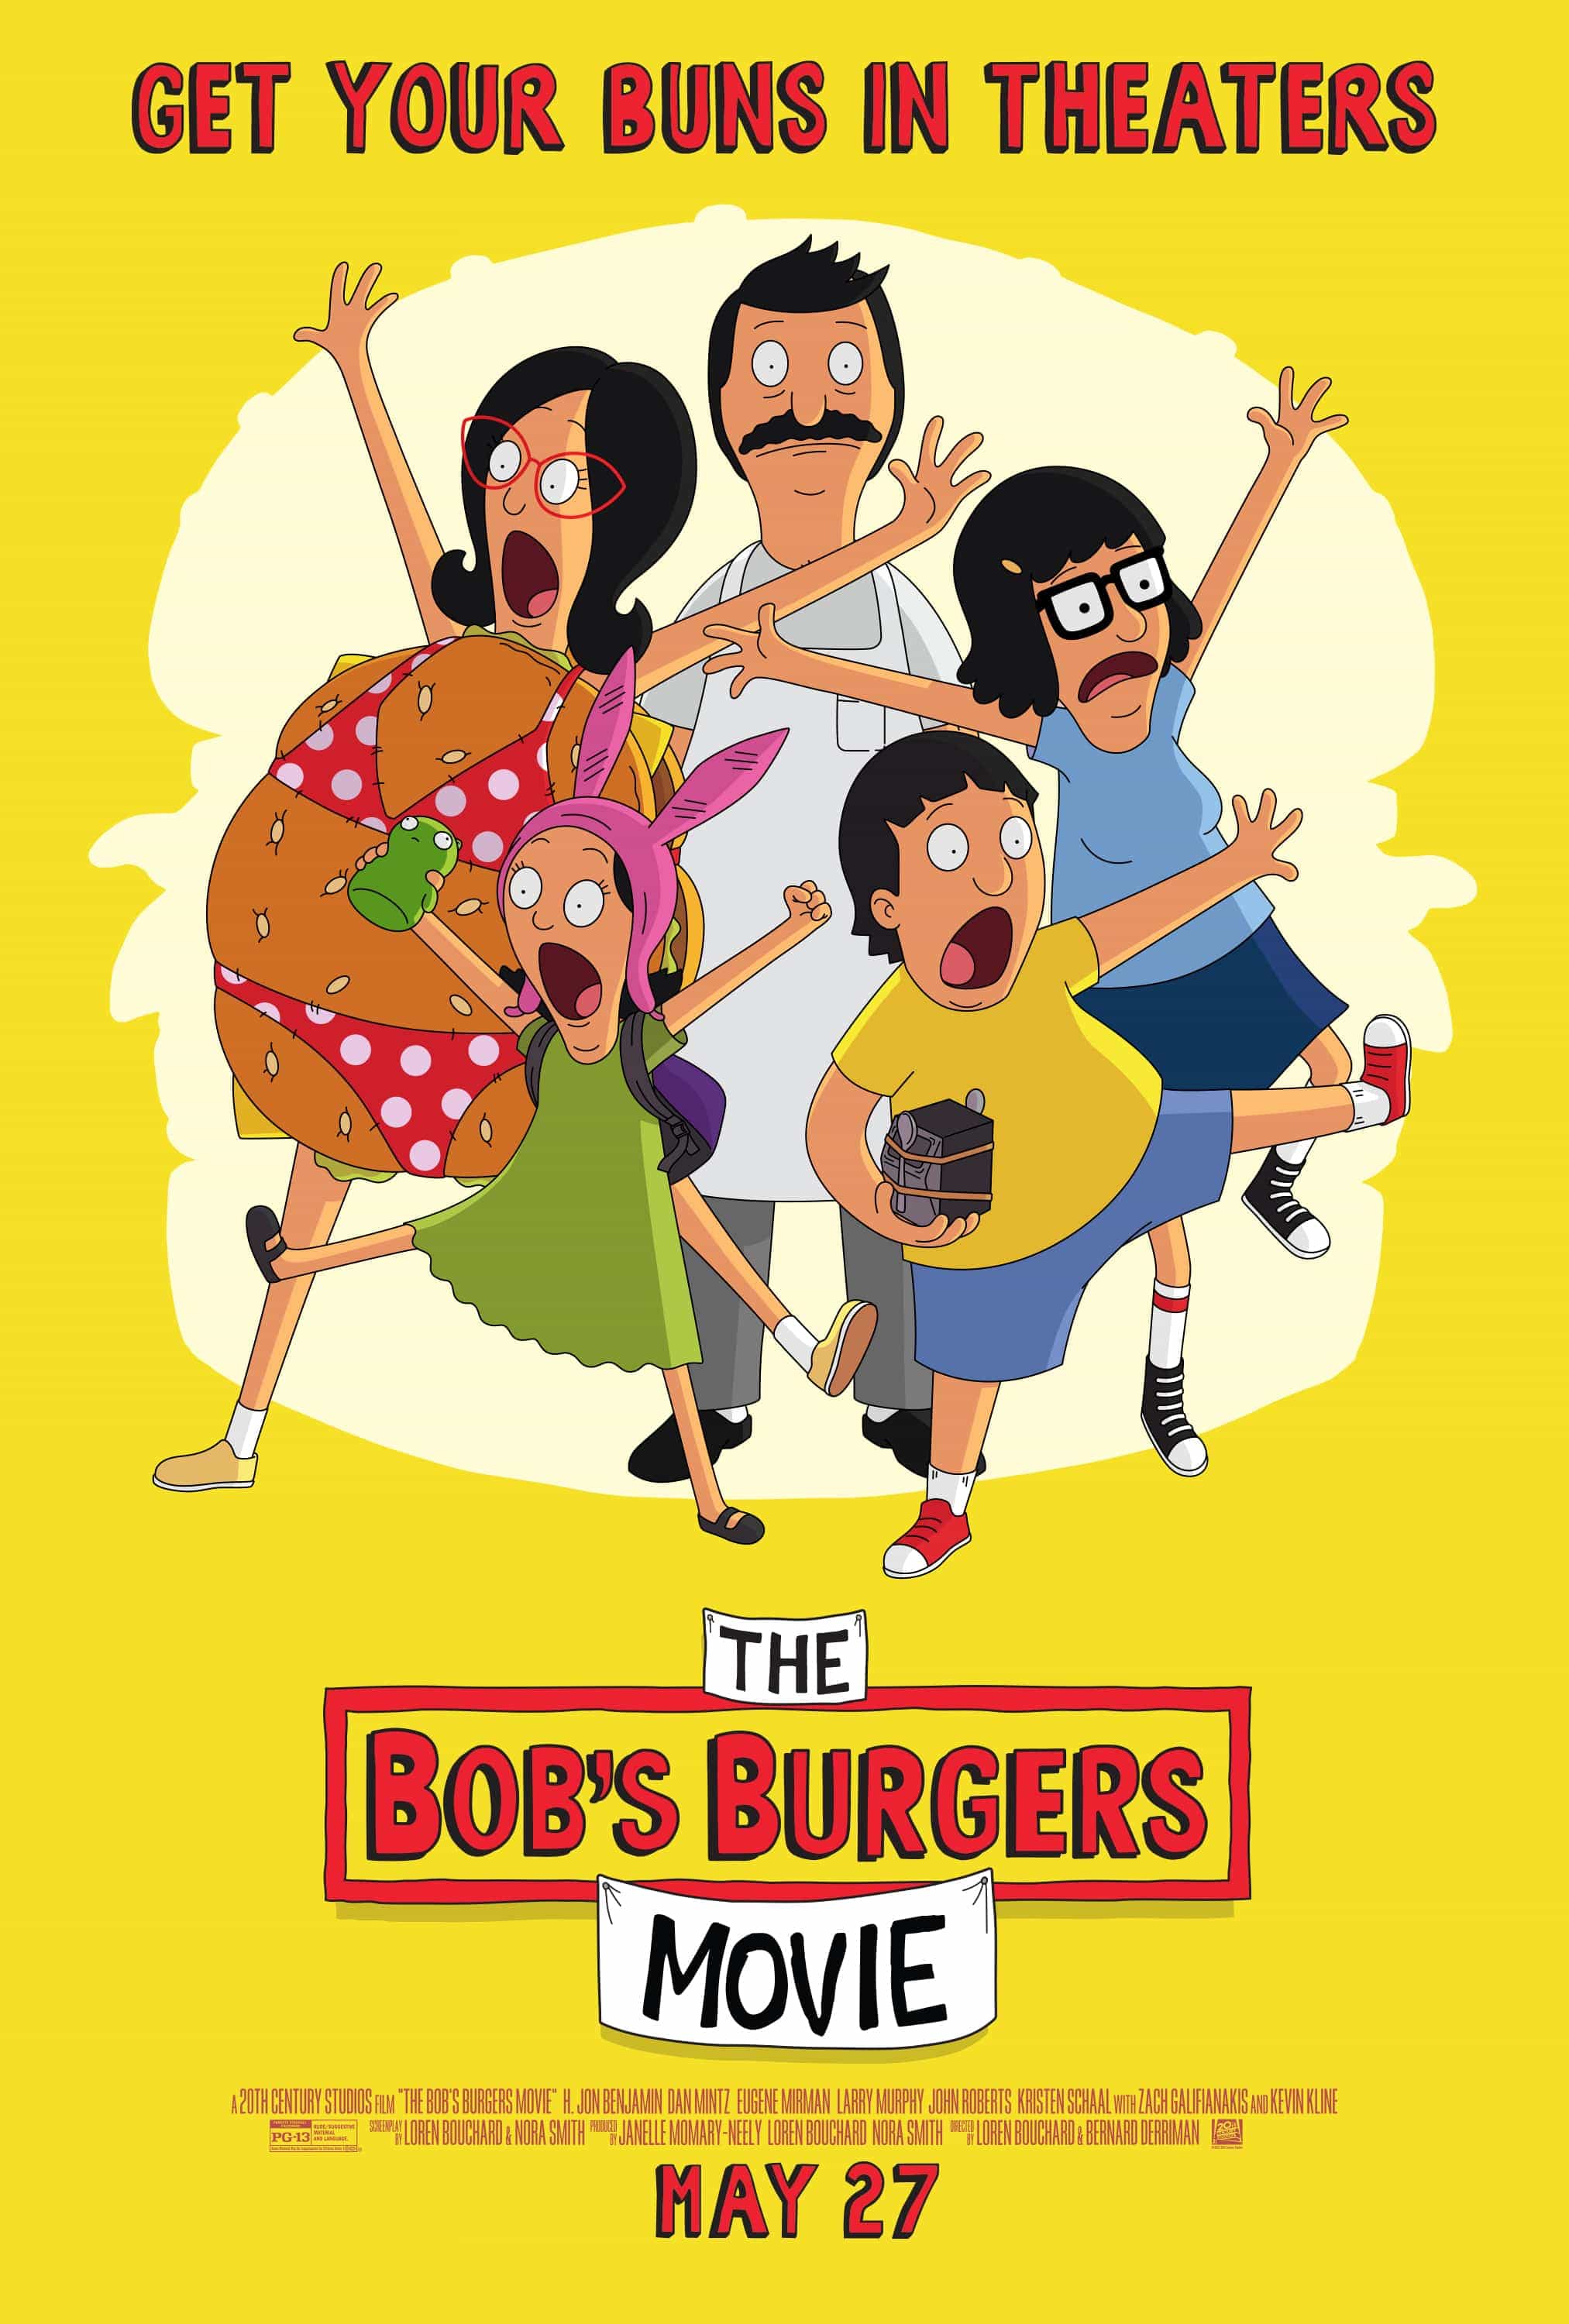 New poster released for The Bobs Burgers Movie starring Kristen Schaal - movie UK release date 1st January 1970 #thebobsburgersmovie